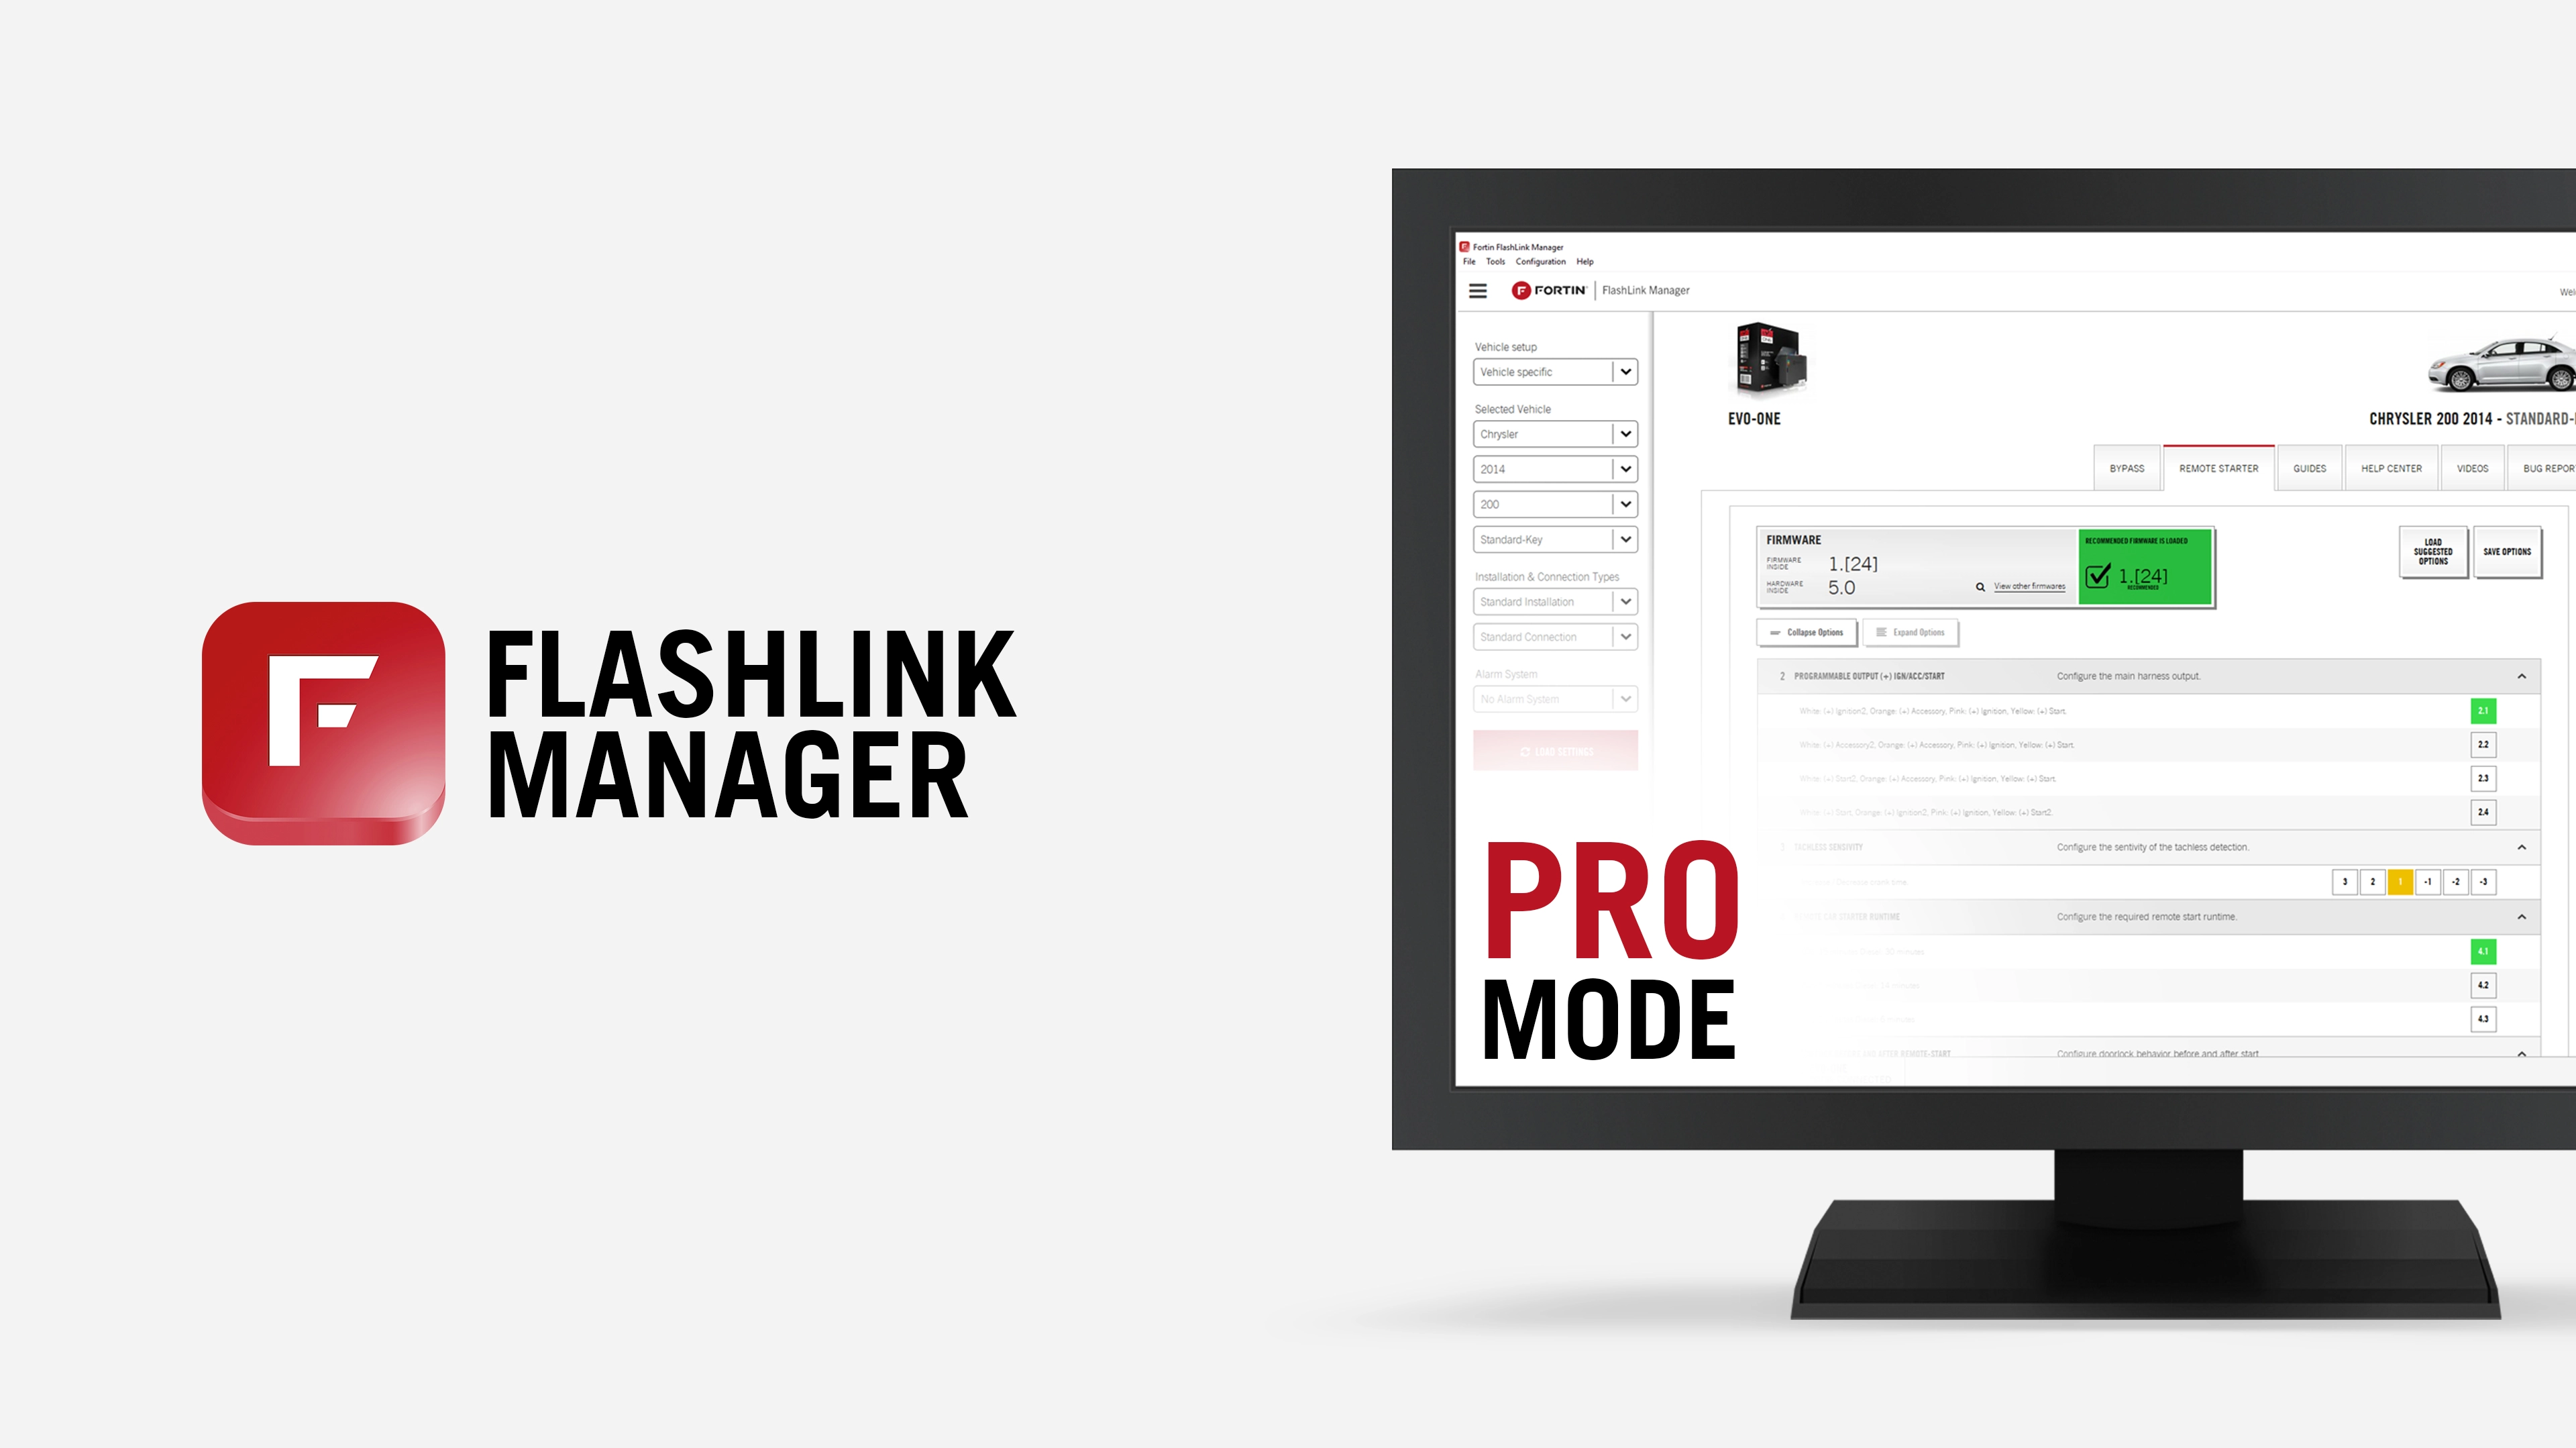 FLASHLINK MANAGER FOR WINDOWS — FORTIN MODULE PROGRAMMING DEMONSTRATION WITH THE PRO MODE